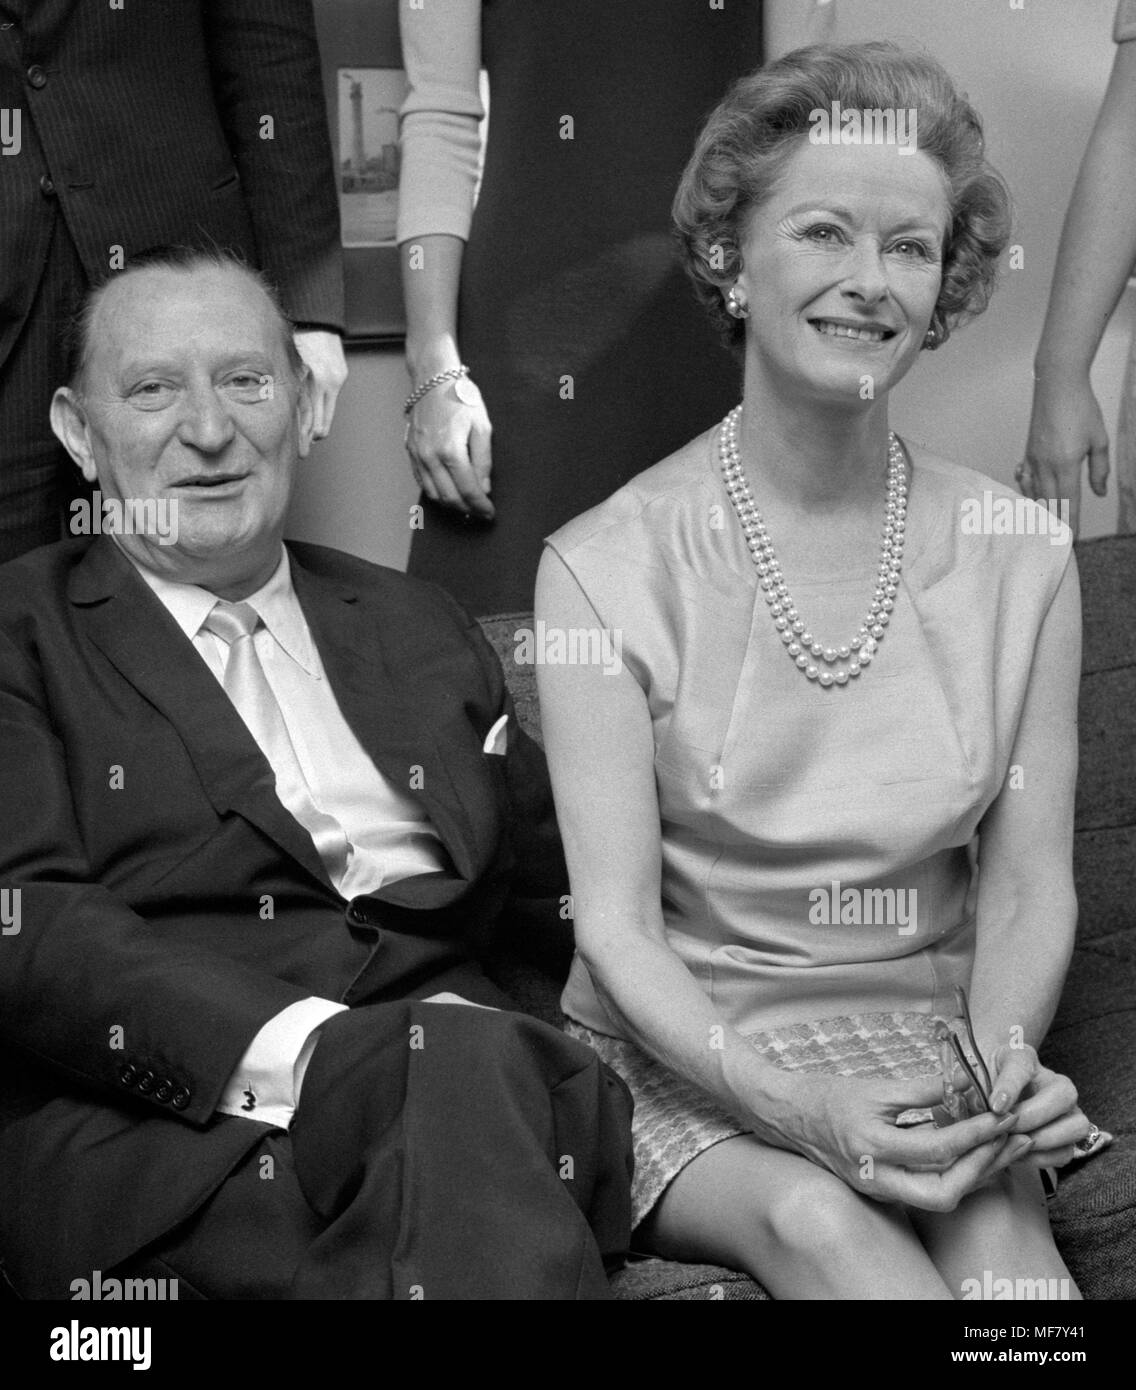 Sir William Carr, the News of the World Chairman, and Lady Carr are photographed at home at Cliveden House, London. Mr Carr and his family are fighting against the takeover bid for the News of the World by Robert Maxwell. ... Media - News of the World Takeover Bid - London ... 22-10-1968 ... London ... UK ... Photo credit should read: PA/PA Archive. Unique Reference No. 36141652 ... Stock Photo